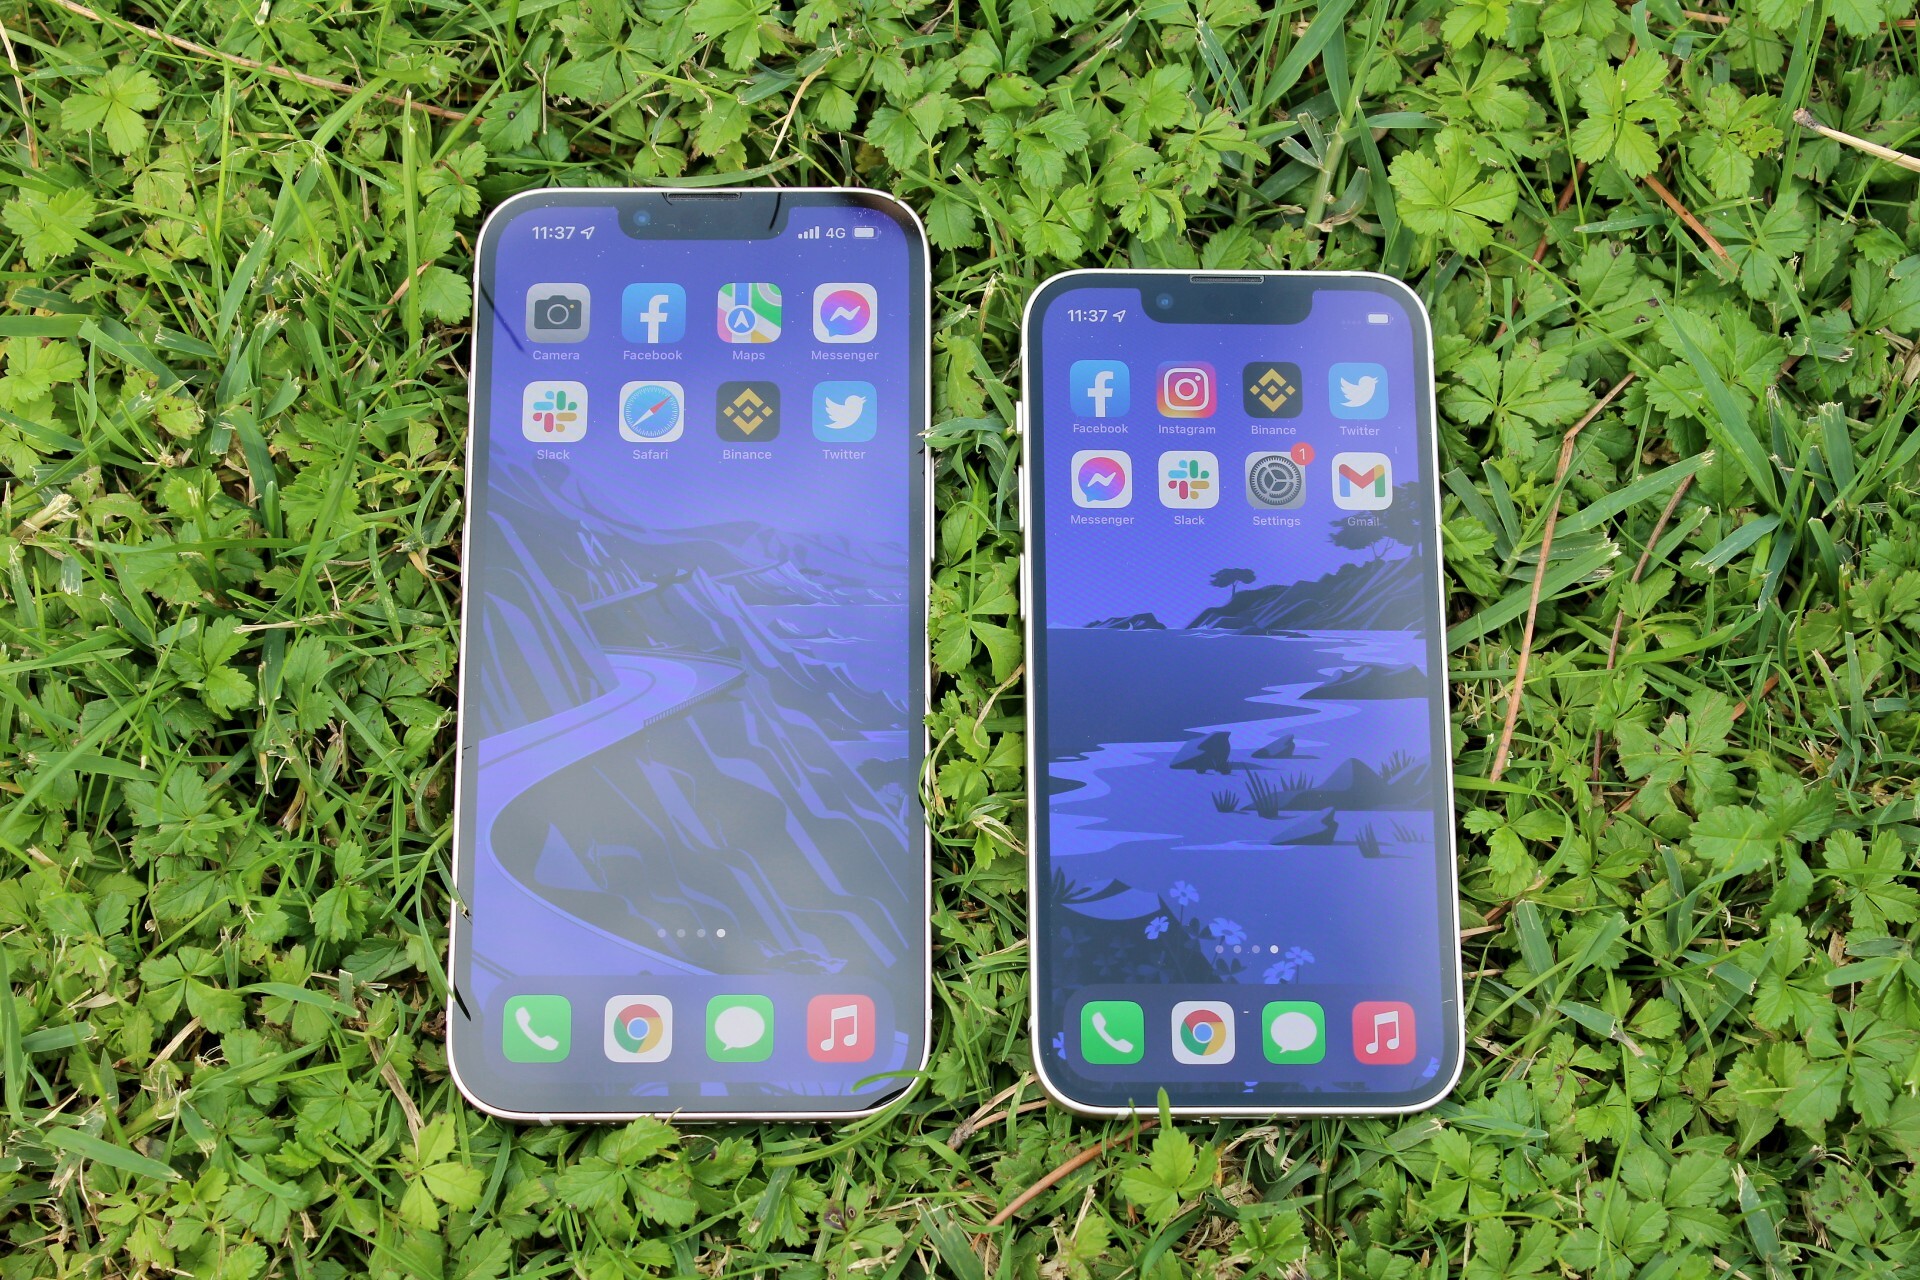 The iOS 15 looks the same as iOS 14, but there are numerous little changes under the hood.